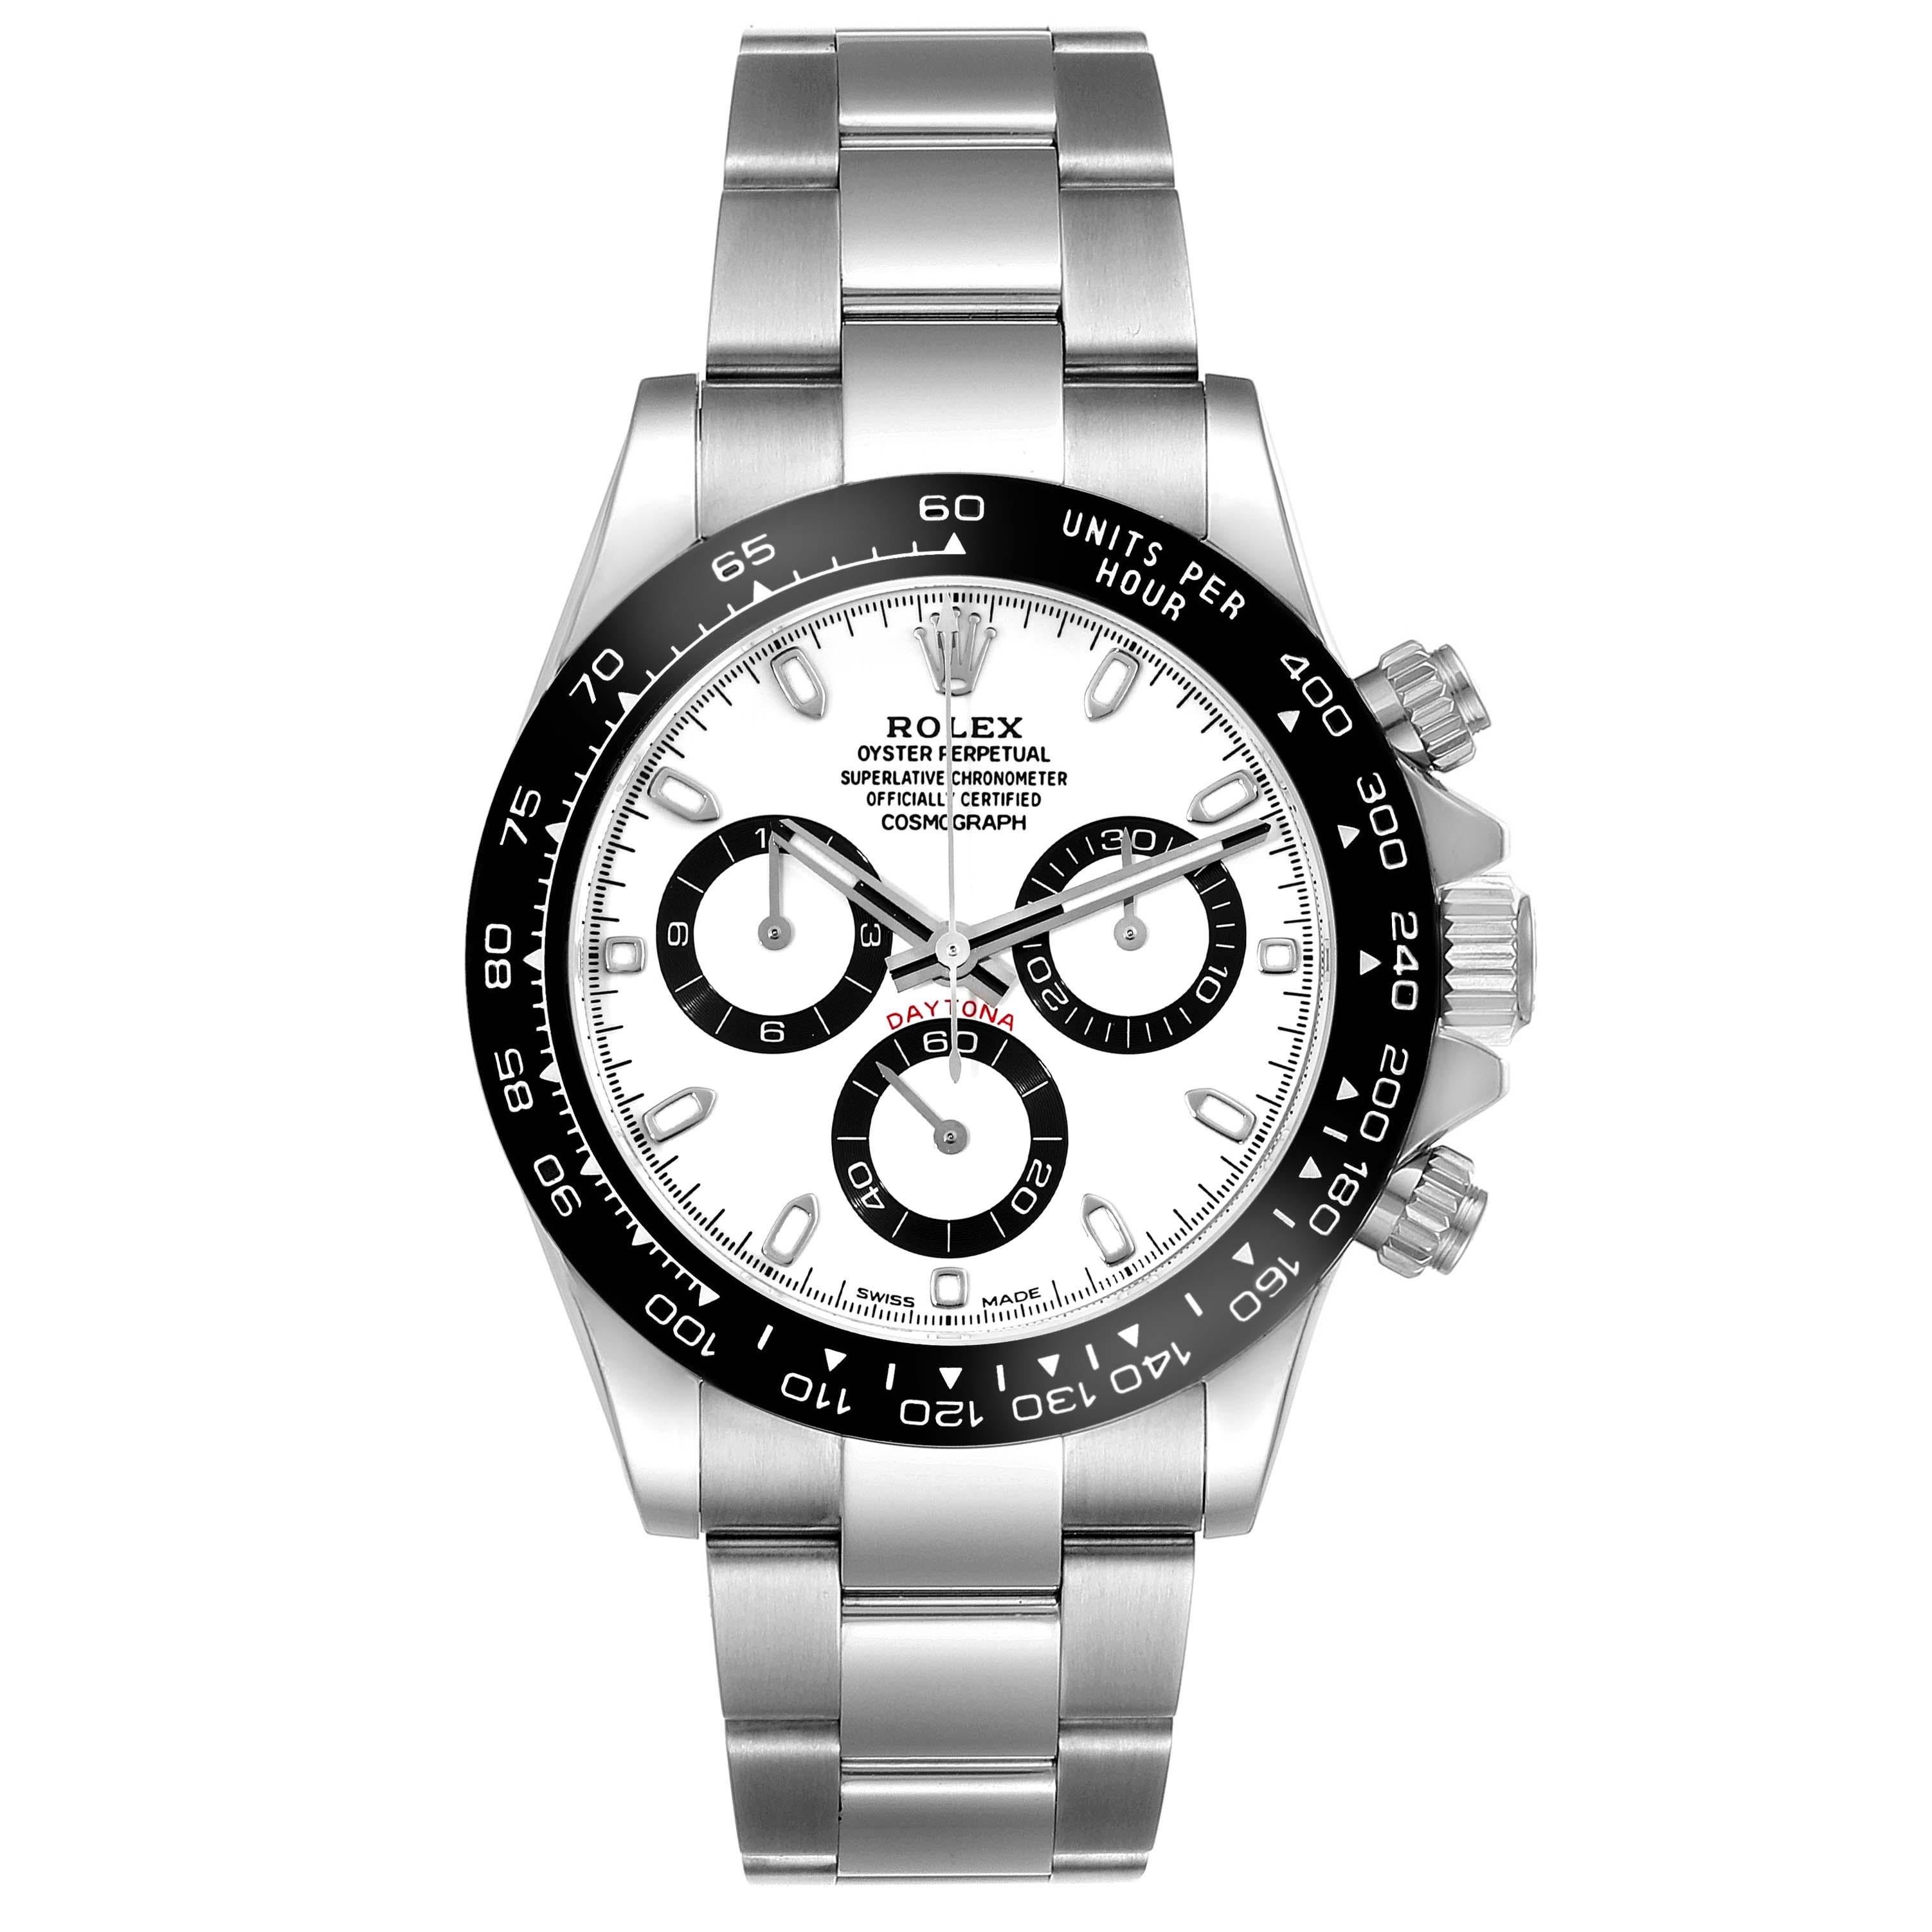 Rolex Daytona Ceramic Bezel White Panda Dial Steel Mens Watch 116500 Box Card. Officially certified chronometer automatic self-winding chronograph movement. Stainless steel case 40.0 mm in diameter. Screw-down crown and pushers. Black monobloc